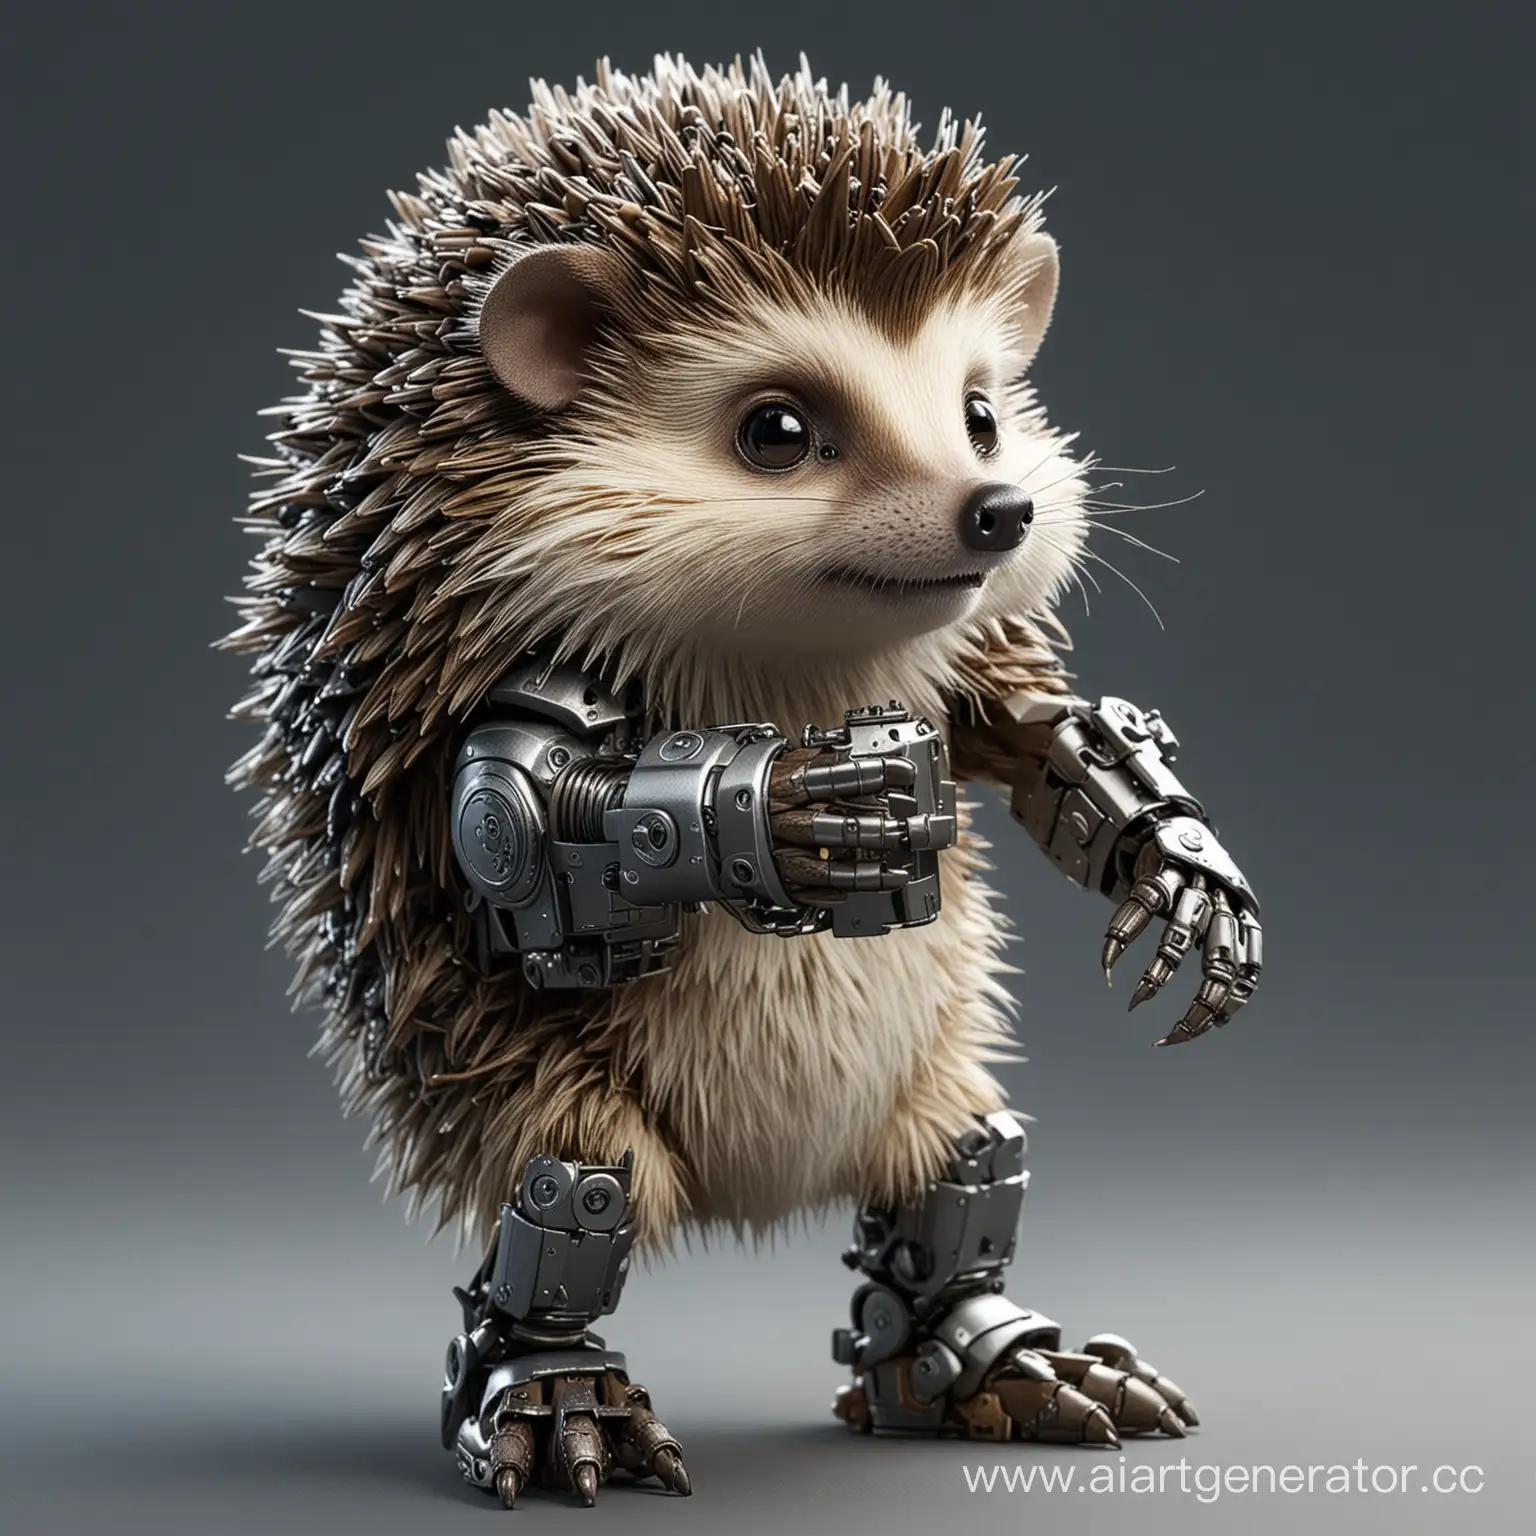 Adorable-Hedgehog-Robot-Balanced-on-Hind-Legs-in-Hyperrealistic-Style